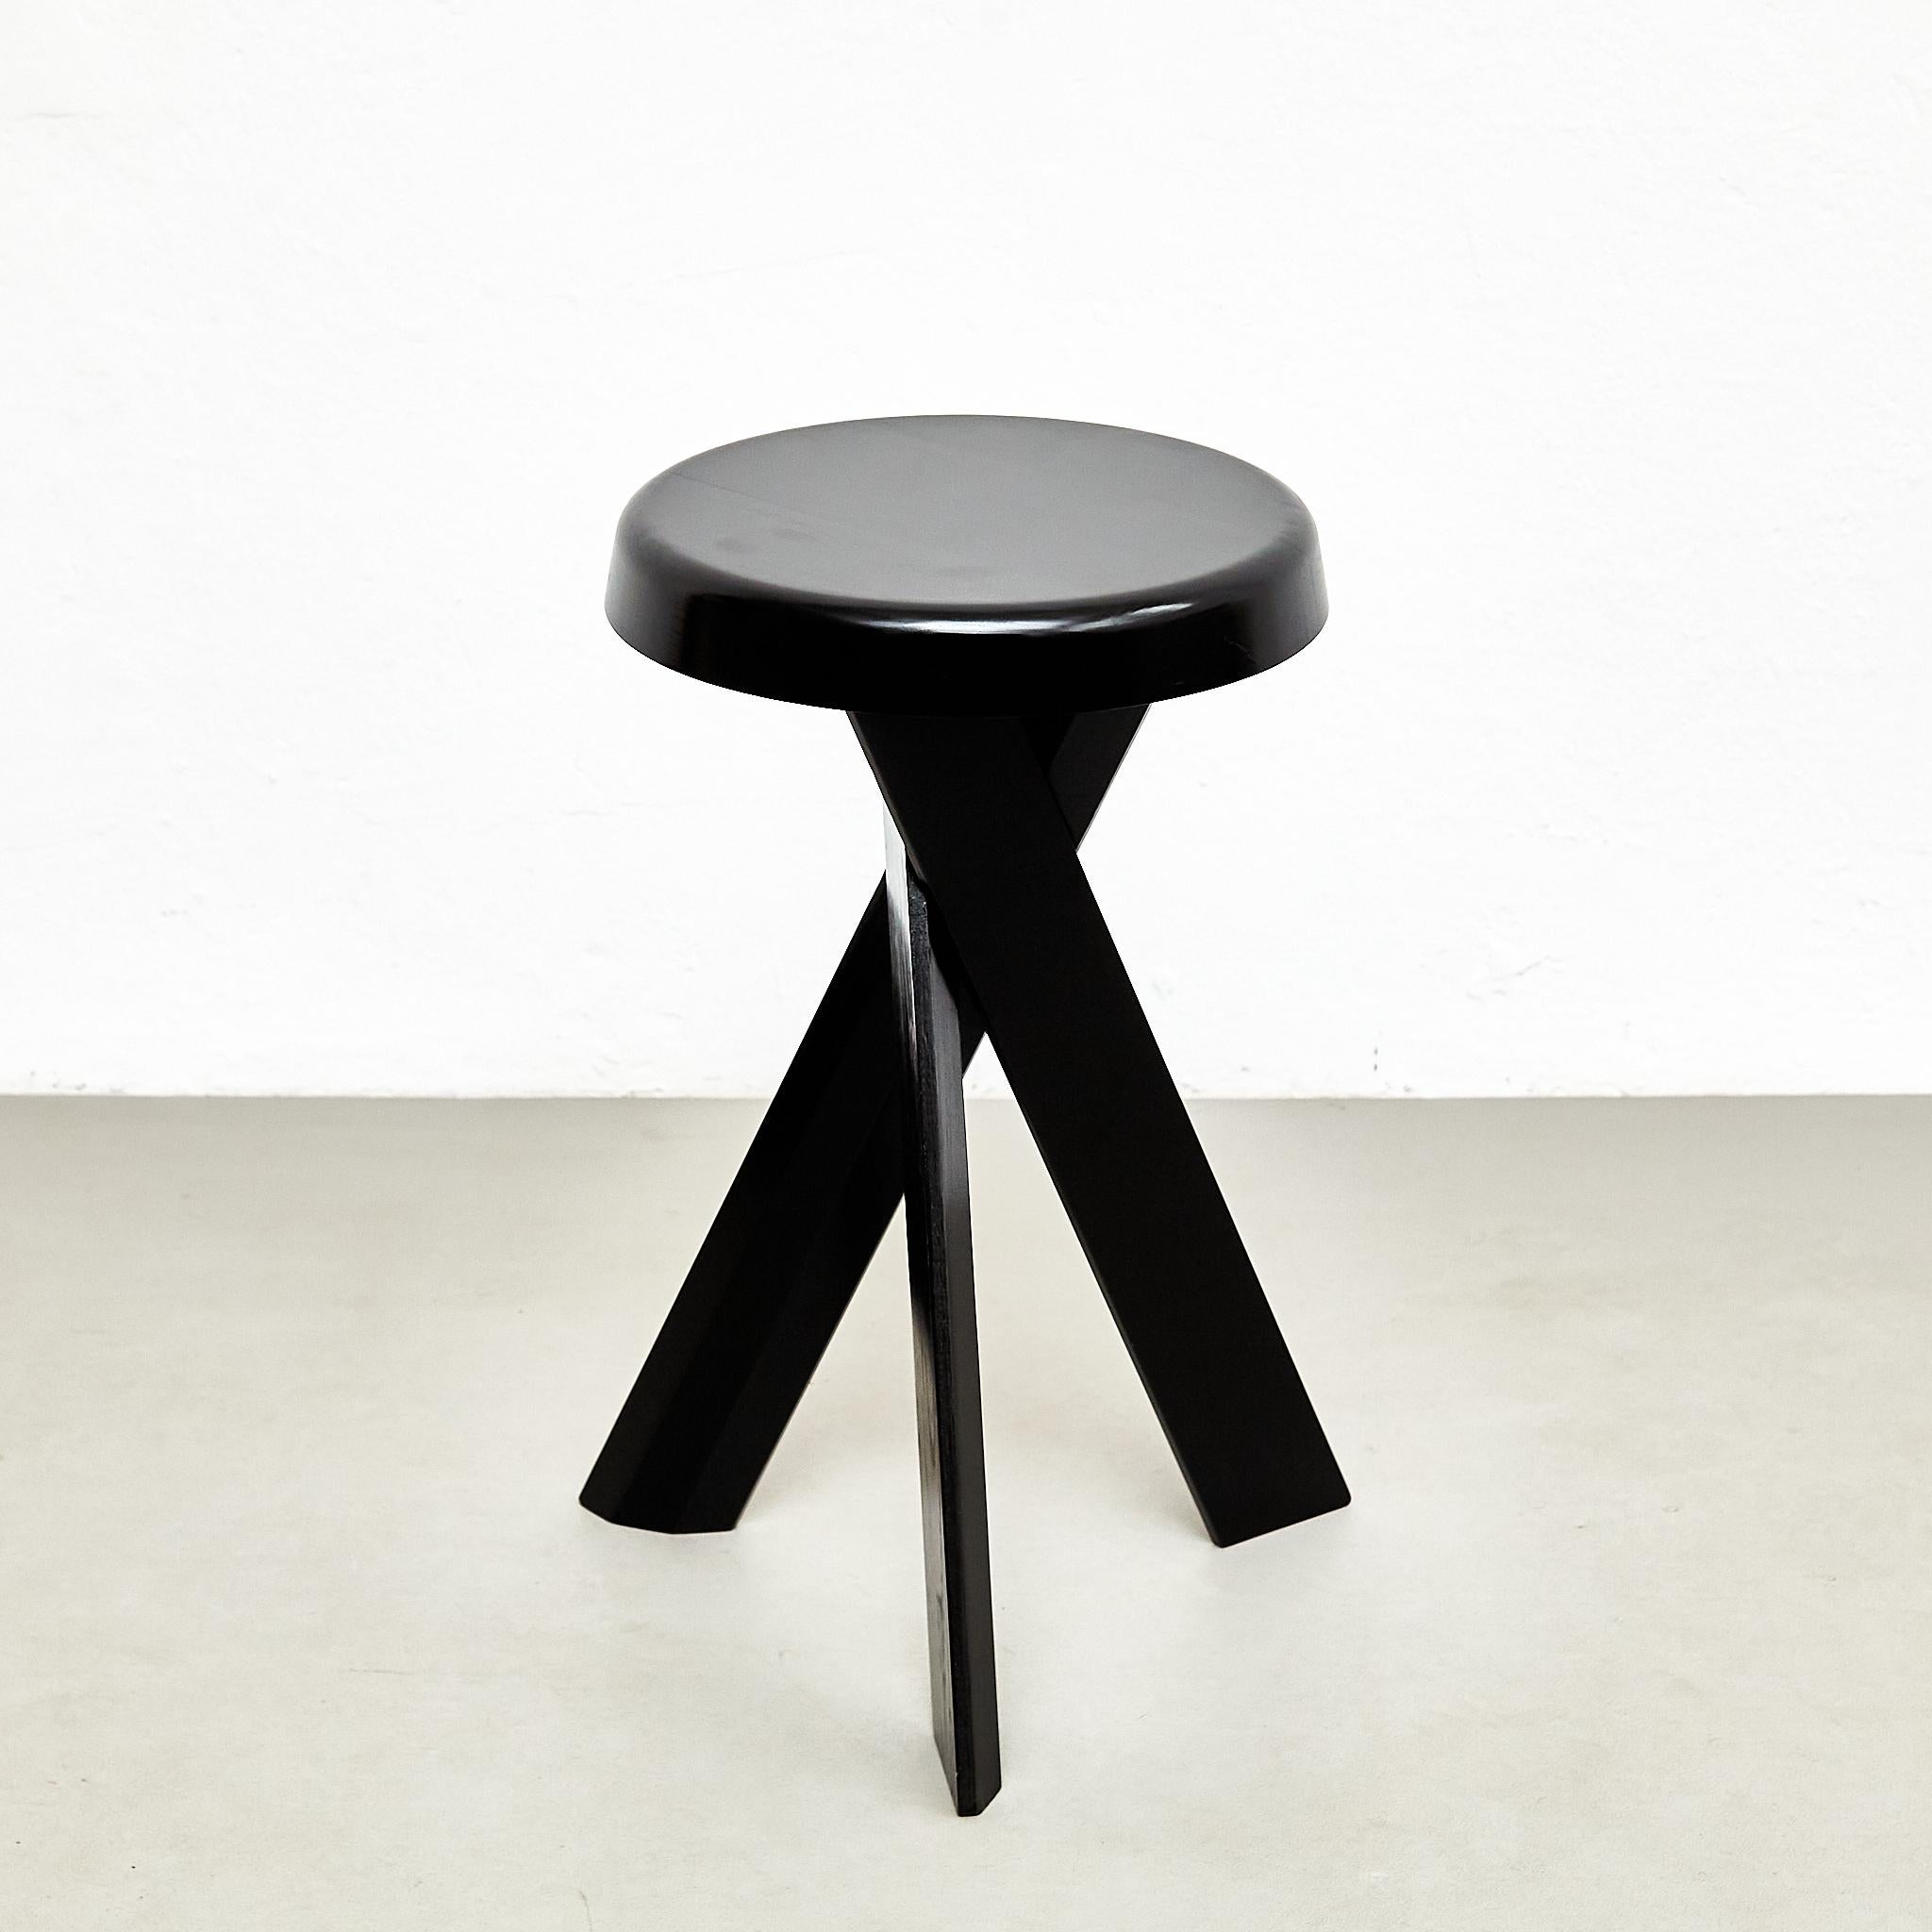 Contemporary Exclusive Pierre Chapo S31b Black Edition Stool, a Timeless French Masterpiece